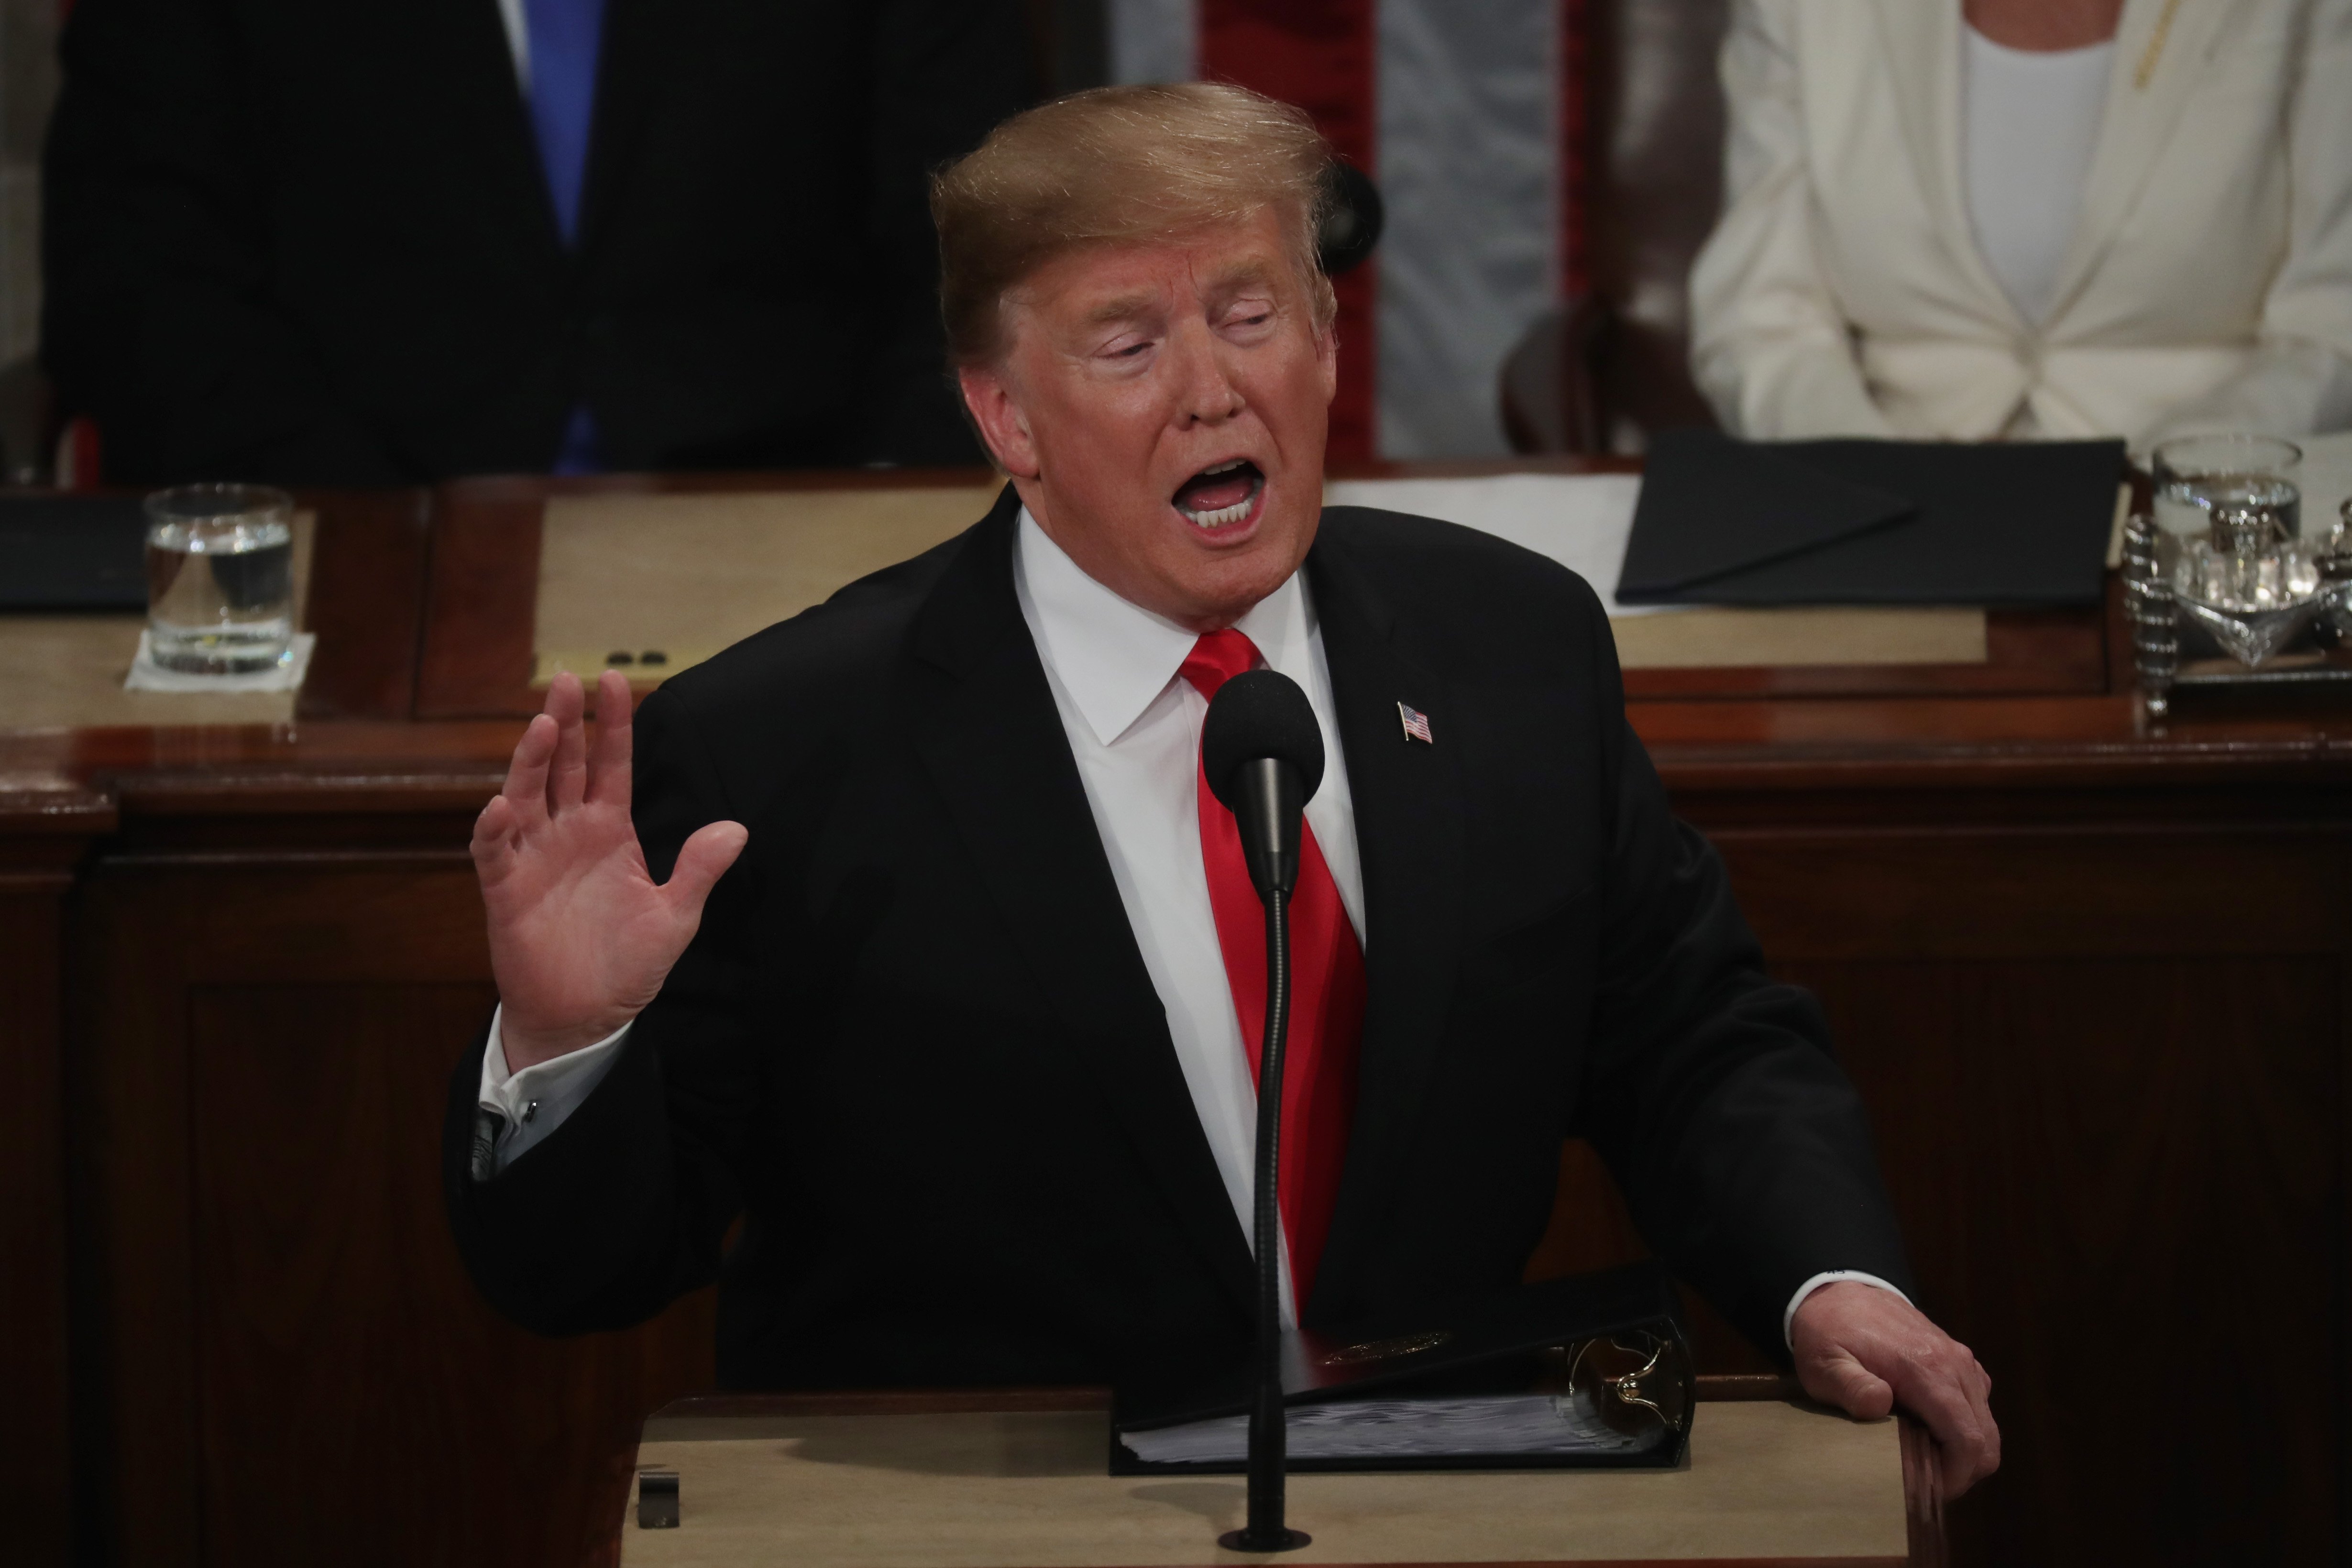 Donald Trump delivering a speech at the 2019 State of the Union address | Photo: Getty Images